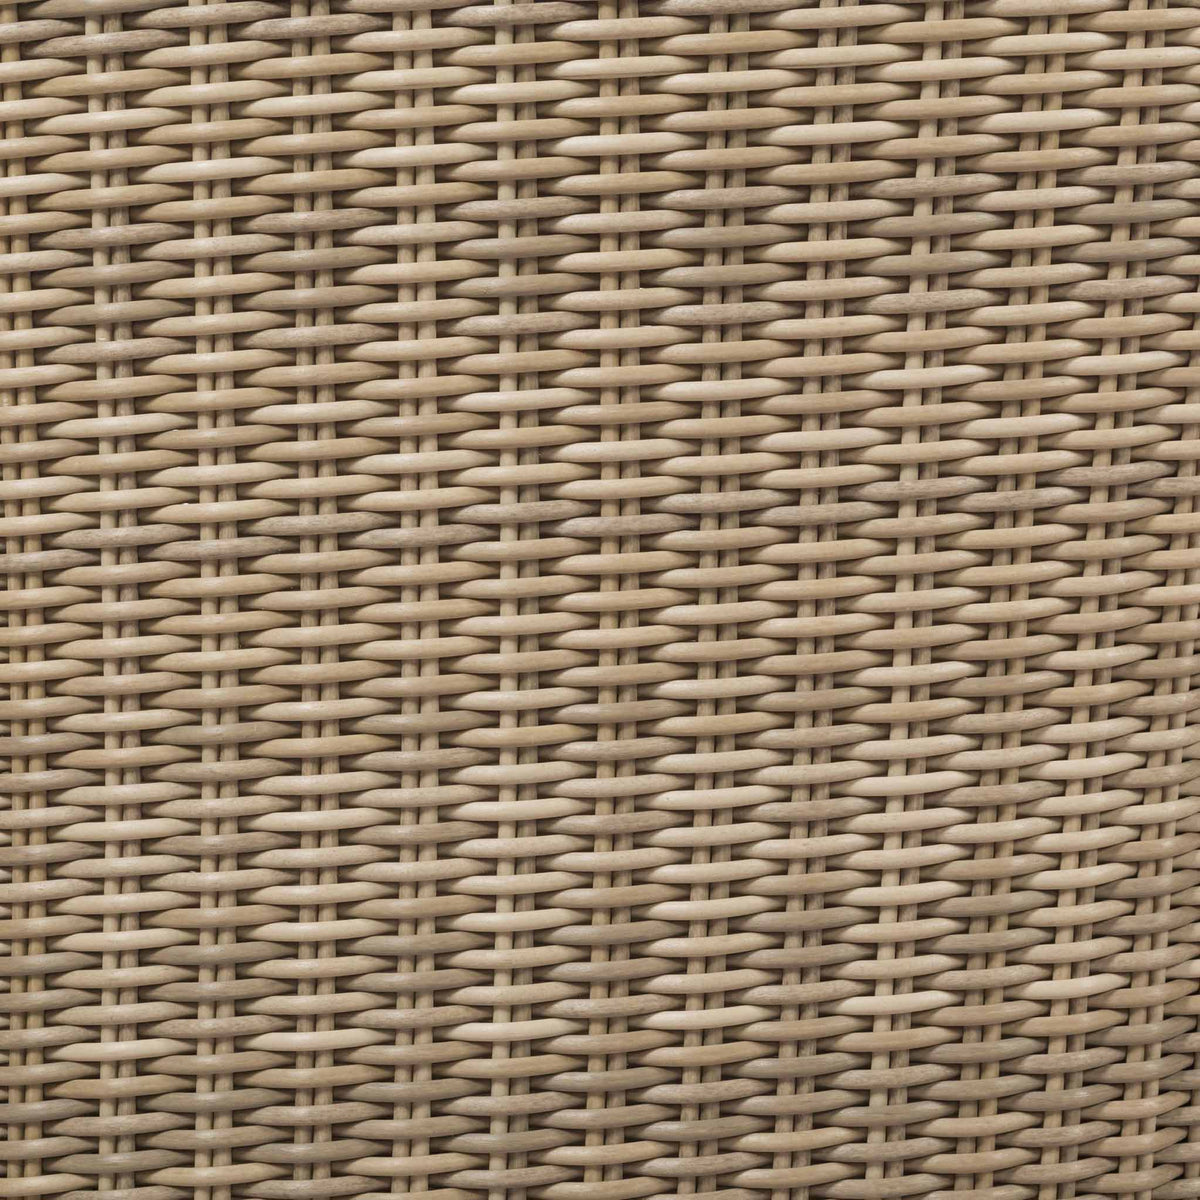 Wentworth 110cm 4 Seater Rattan Round Outdoor Dining Set close up of rattan weave